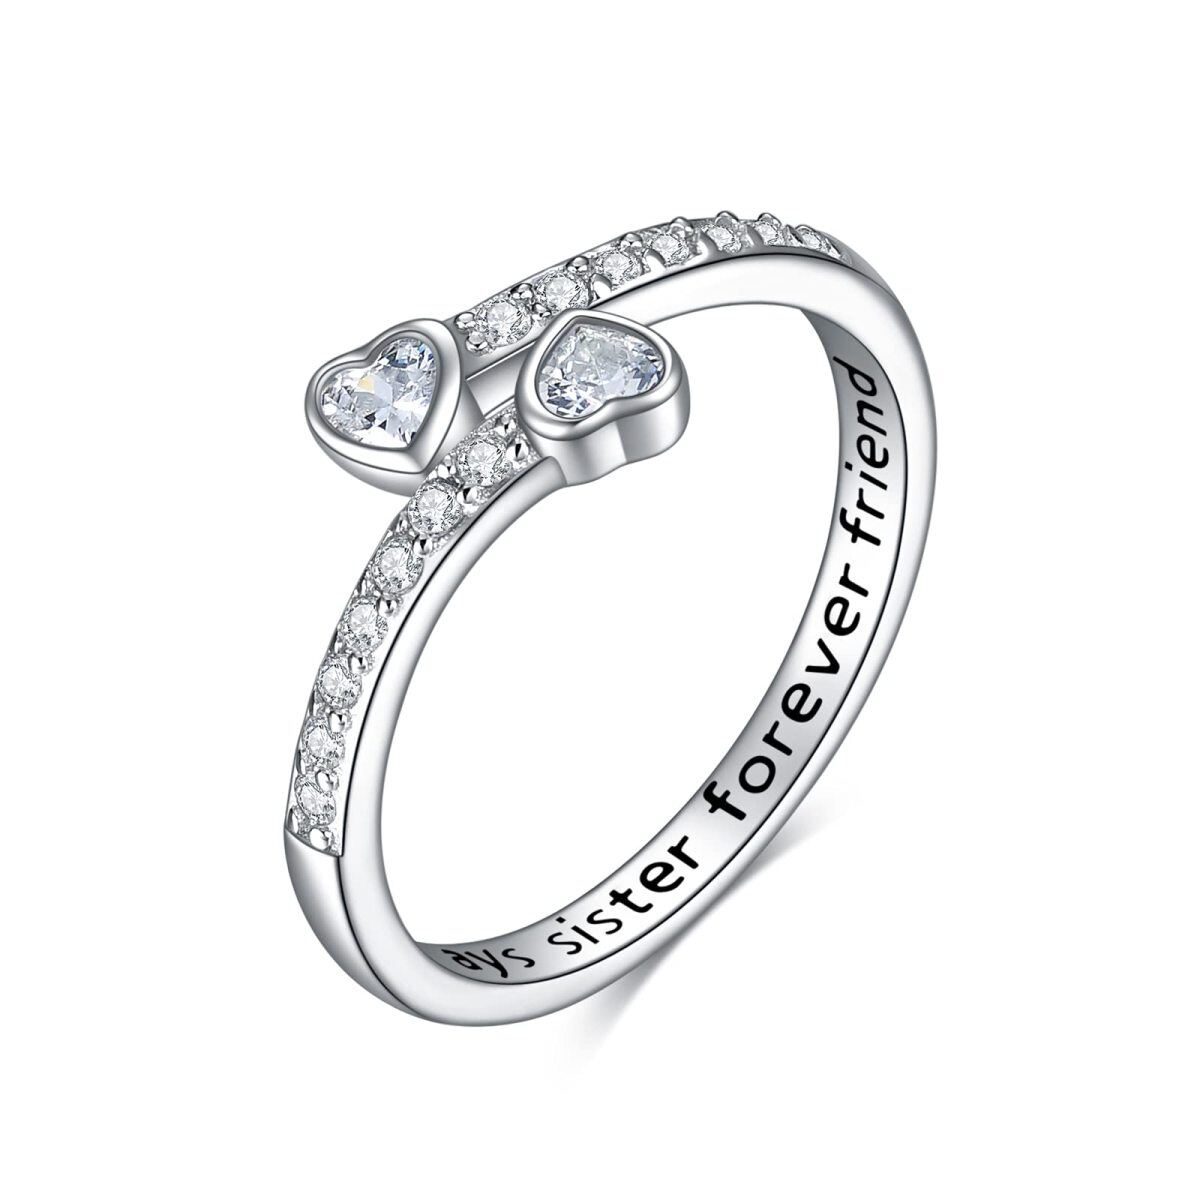 Sterling Silver Heart Shaped Cubic Zirconia Sisters & Heart Ring with Engraved Word-1